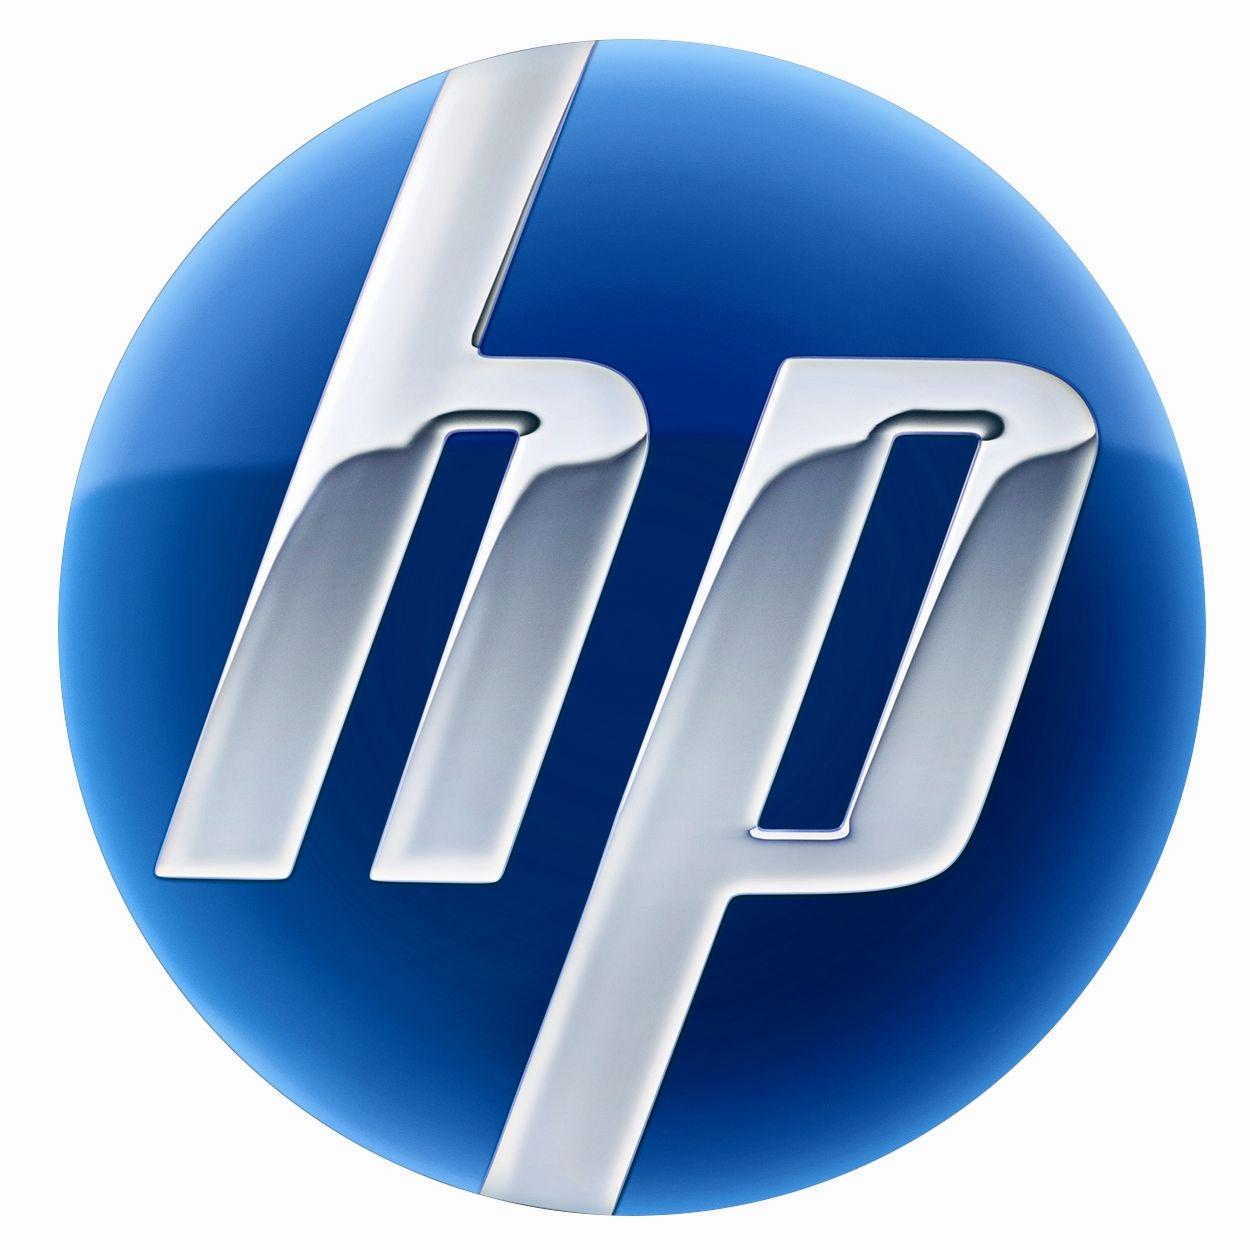 Cool HP Logo - hp logo - Google Search | Candice's Personal Brand Collage | Hp logo ...